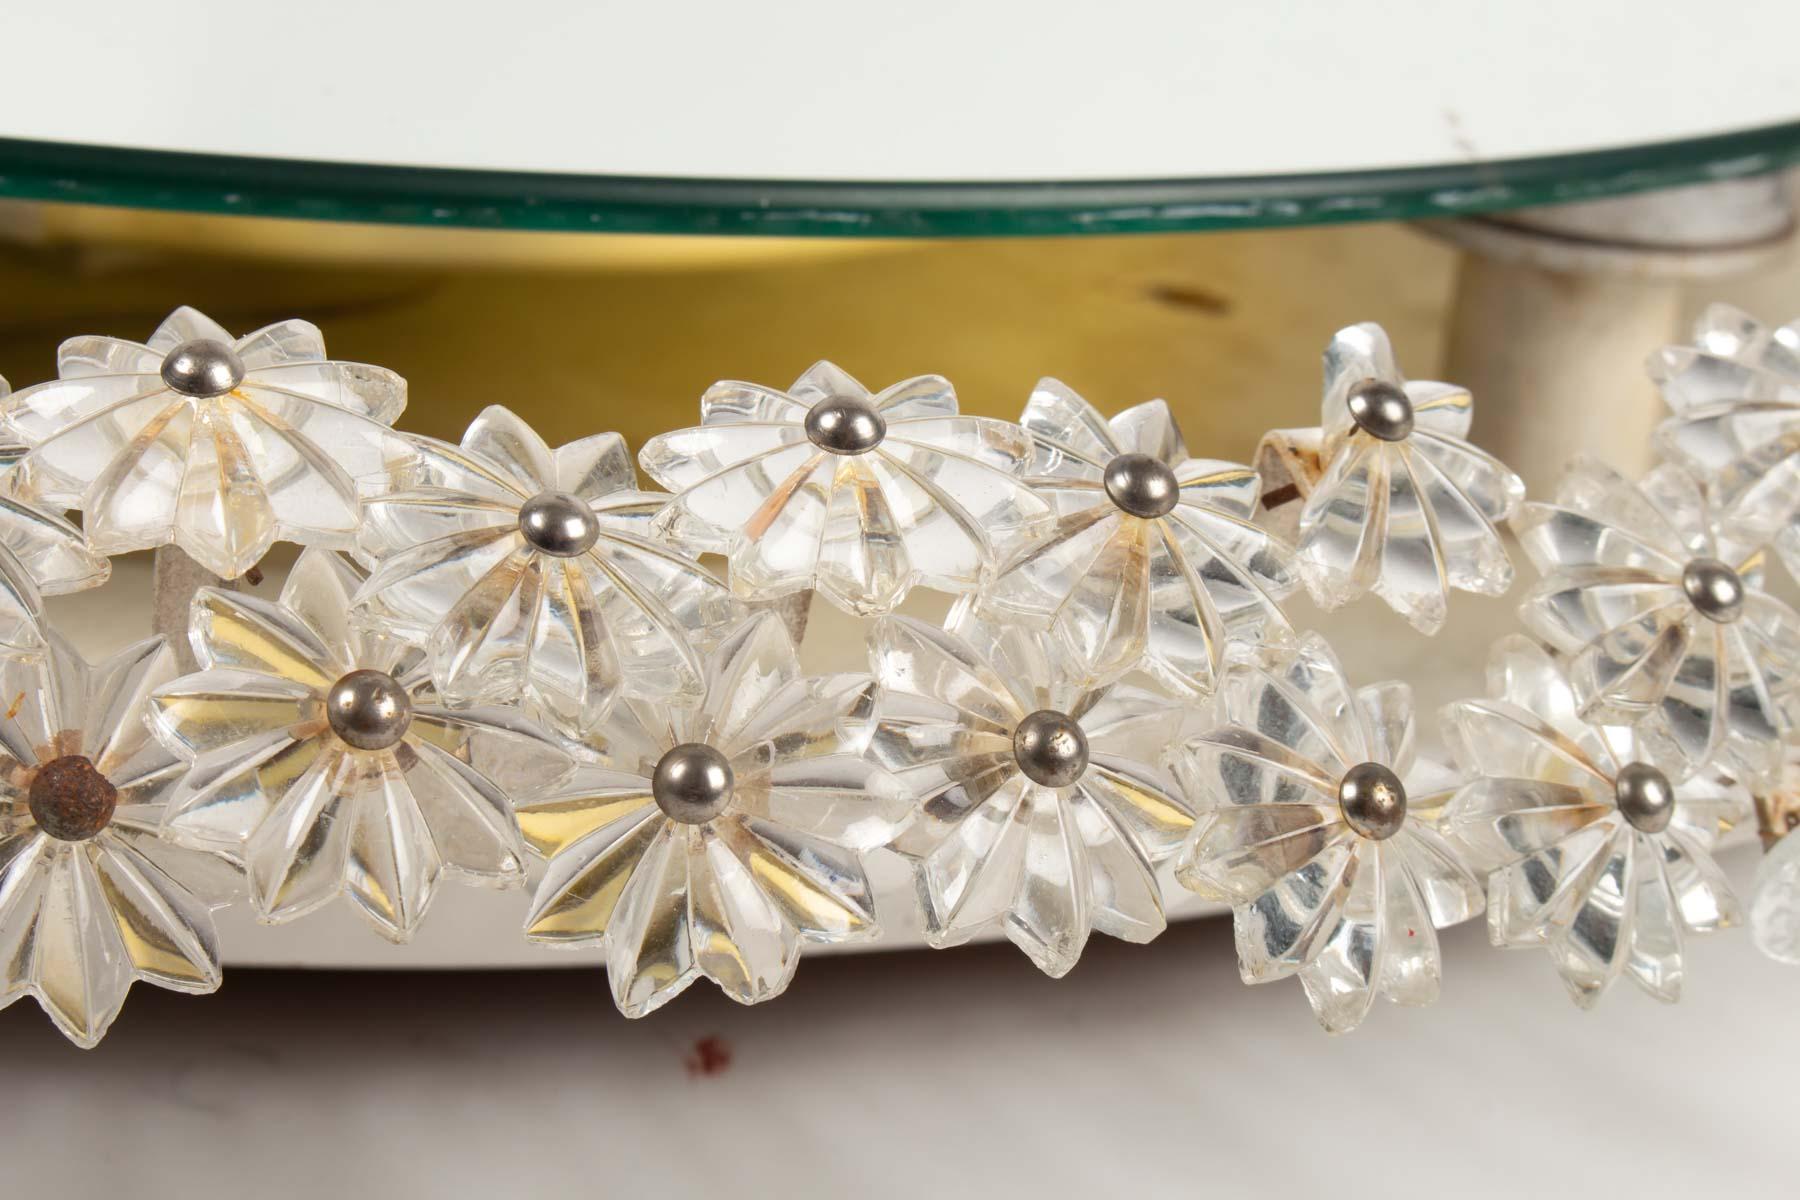 Mid-20th Century Illuminating Mirror, 1950-1960 Design in Painted Metal and Glass Flowers